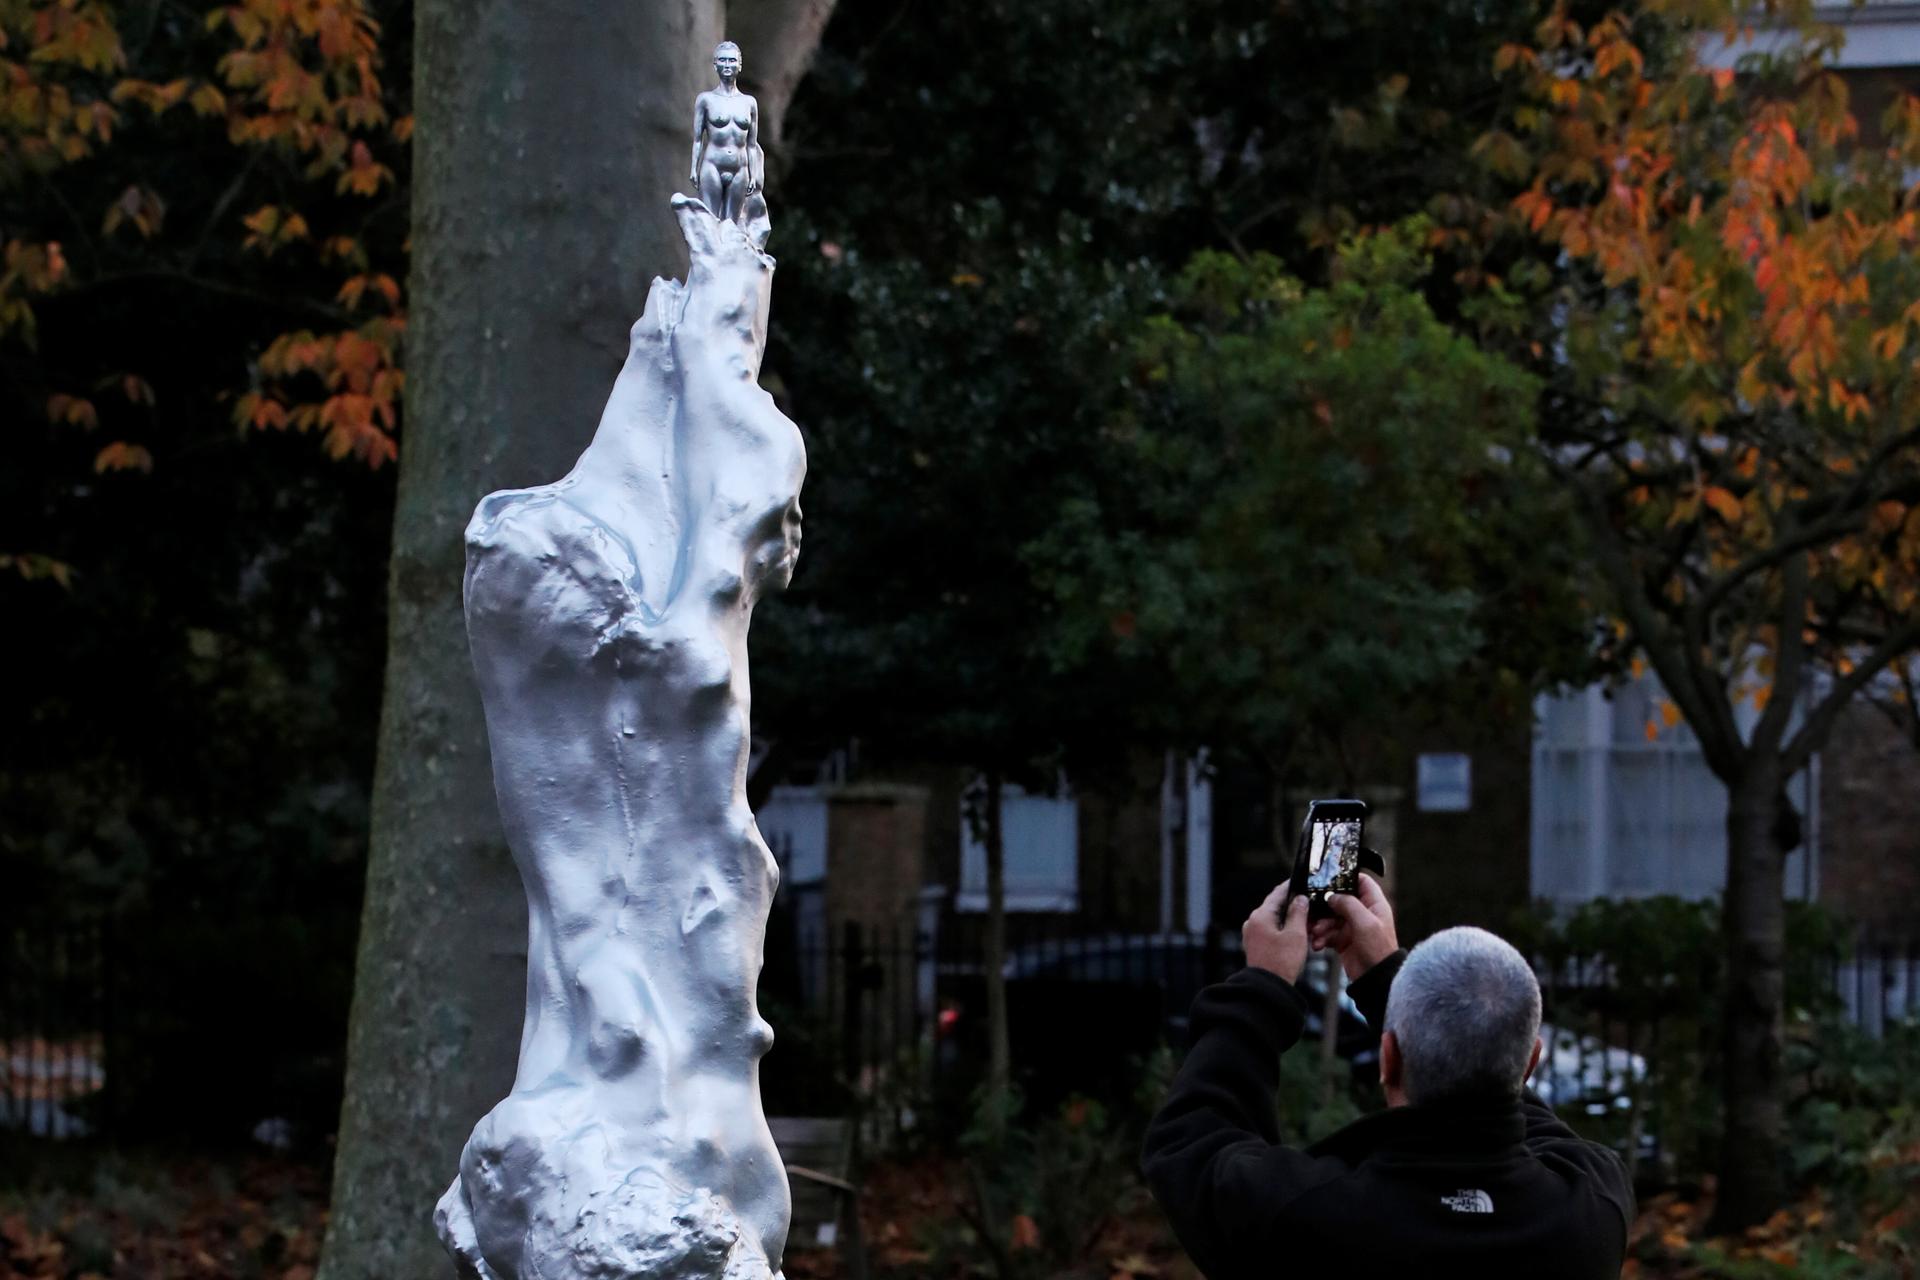 A person takes a photo of the Mary Wollstonecraft statue by artist Maggi Hambling in Newington Green, London, Britain, Nov. 11, 2020.